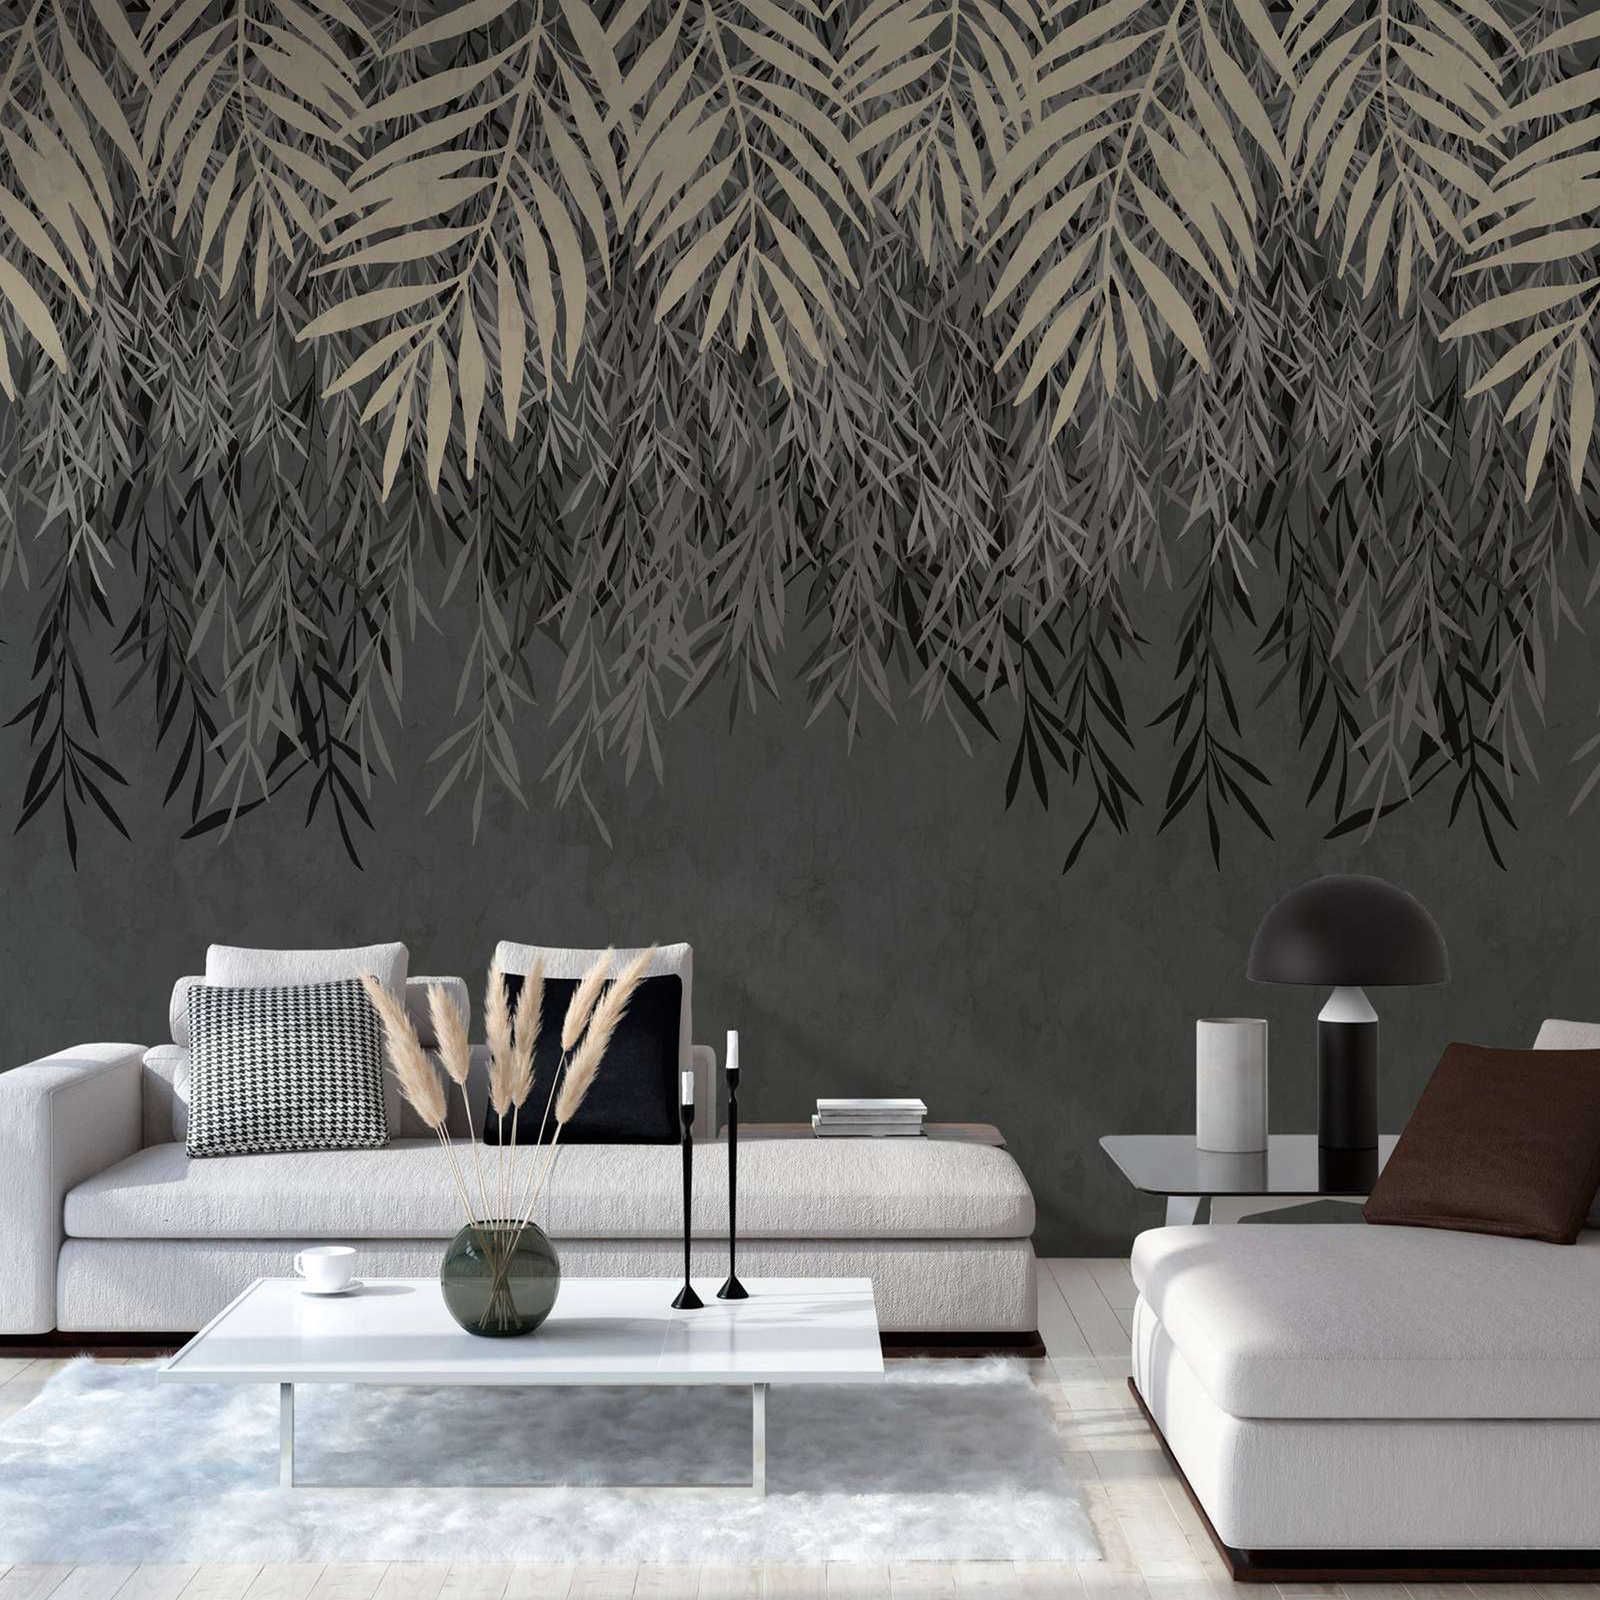             Non-woven wallpaper with dark leaf pattern large-scale - grey, cream
        